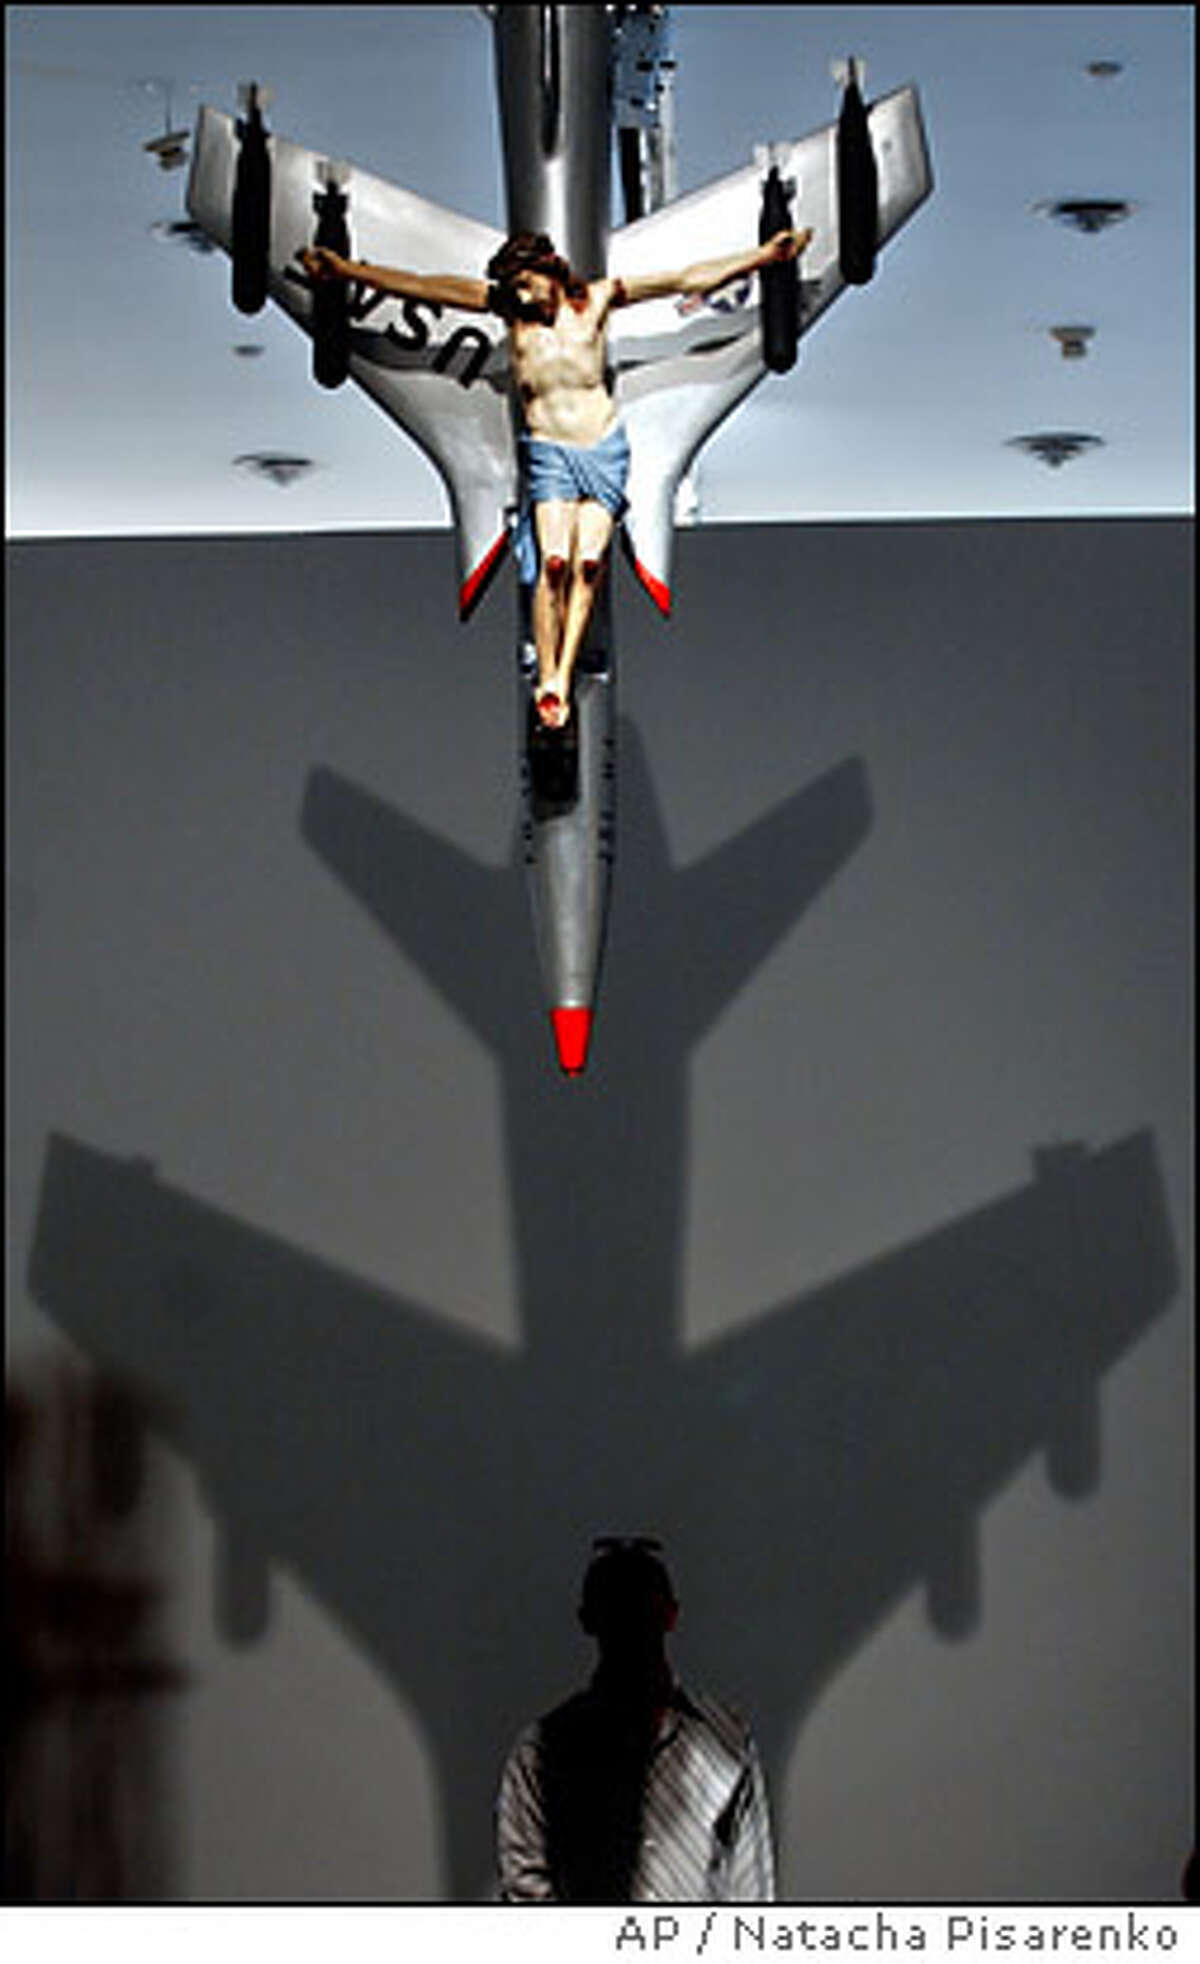 Argentine artist Leon Ferrari was known for works such as this figure of Christ crucified on a U.S. combat plane that often sparked controvery. Jorge Mario Bergoglio, before he became Pope Francis, tried to shut down an exhibit of his work. A judge agreed, but a different judge later overturned the decision. Source: Religion News Service